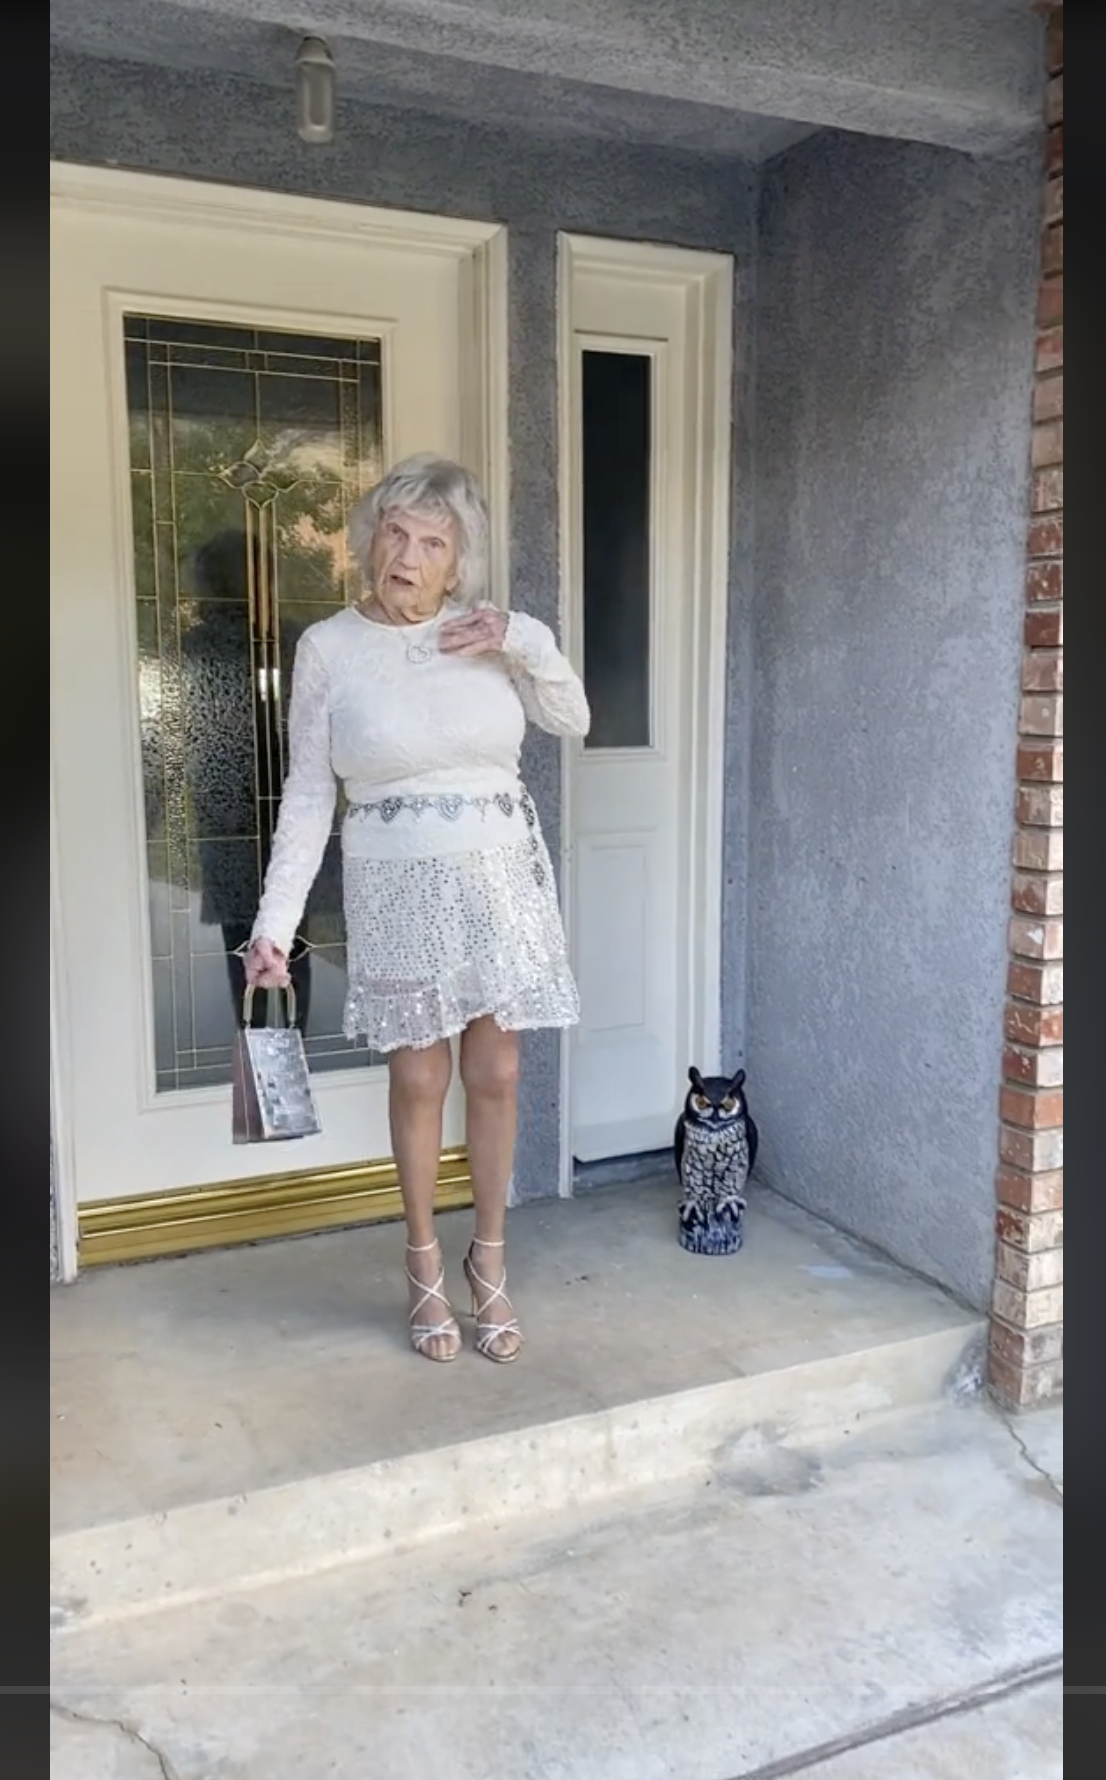 Betsy Lou standing outside her home, in a video dated February 6, 2023 | Source: tiktok.com/@betsylou.piano